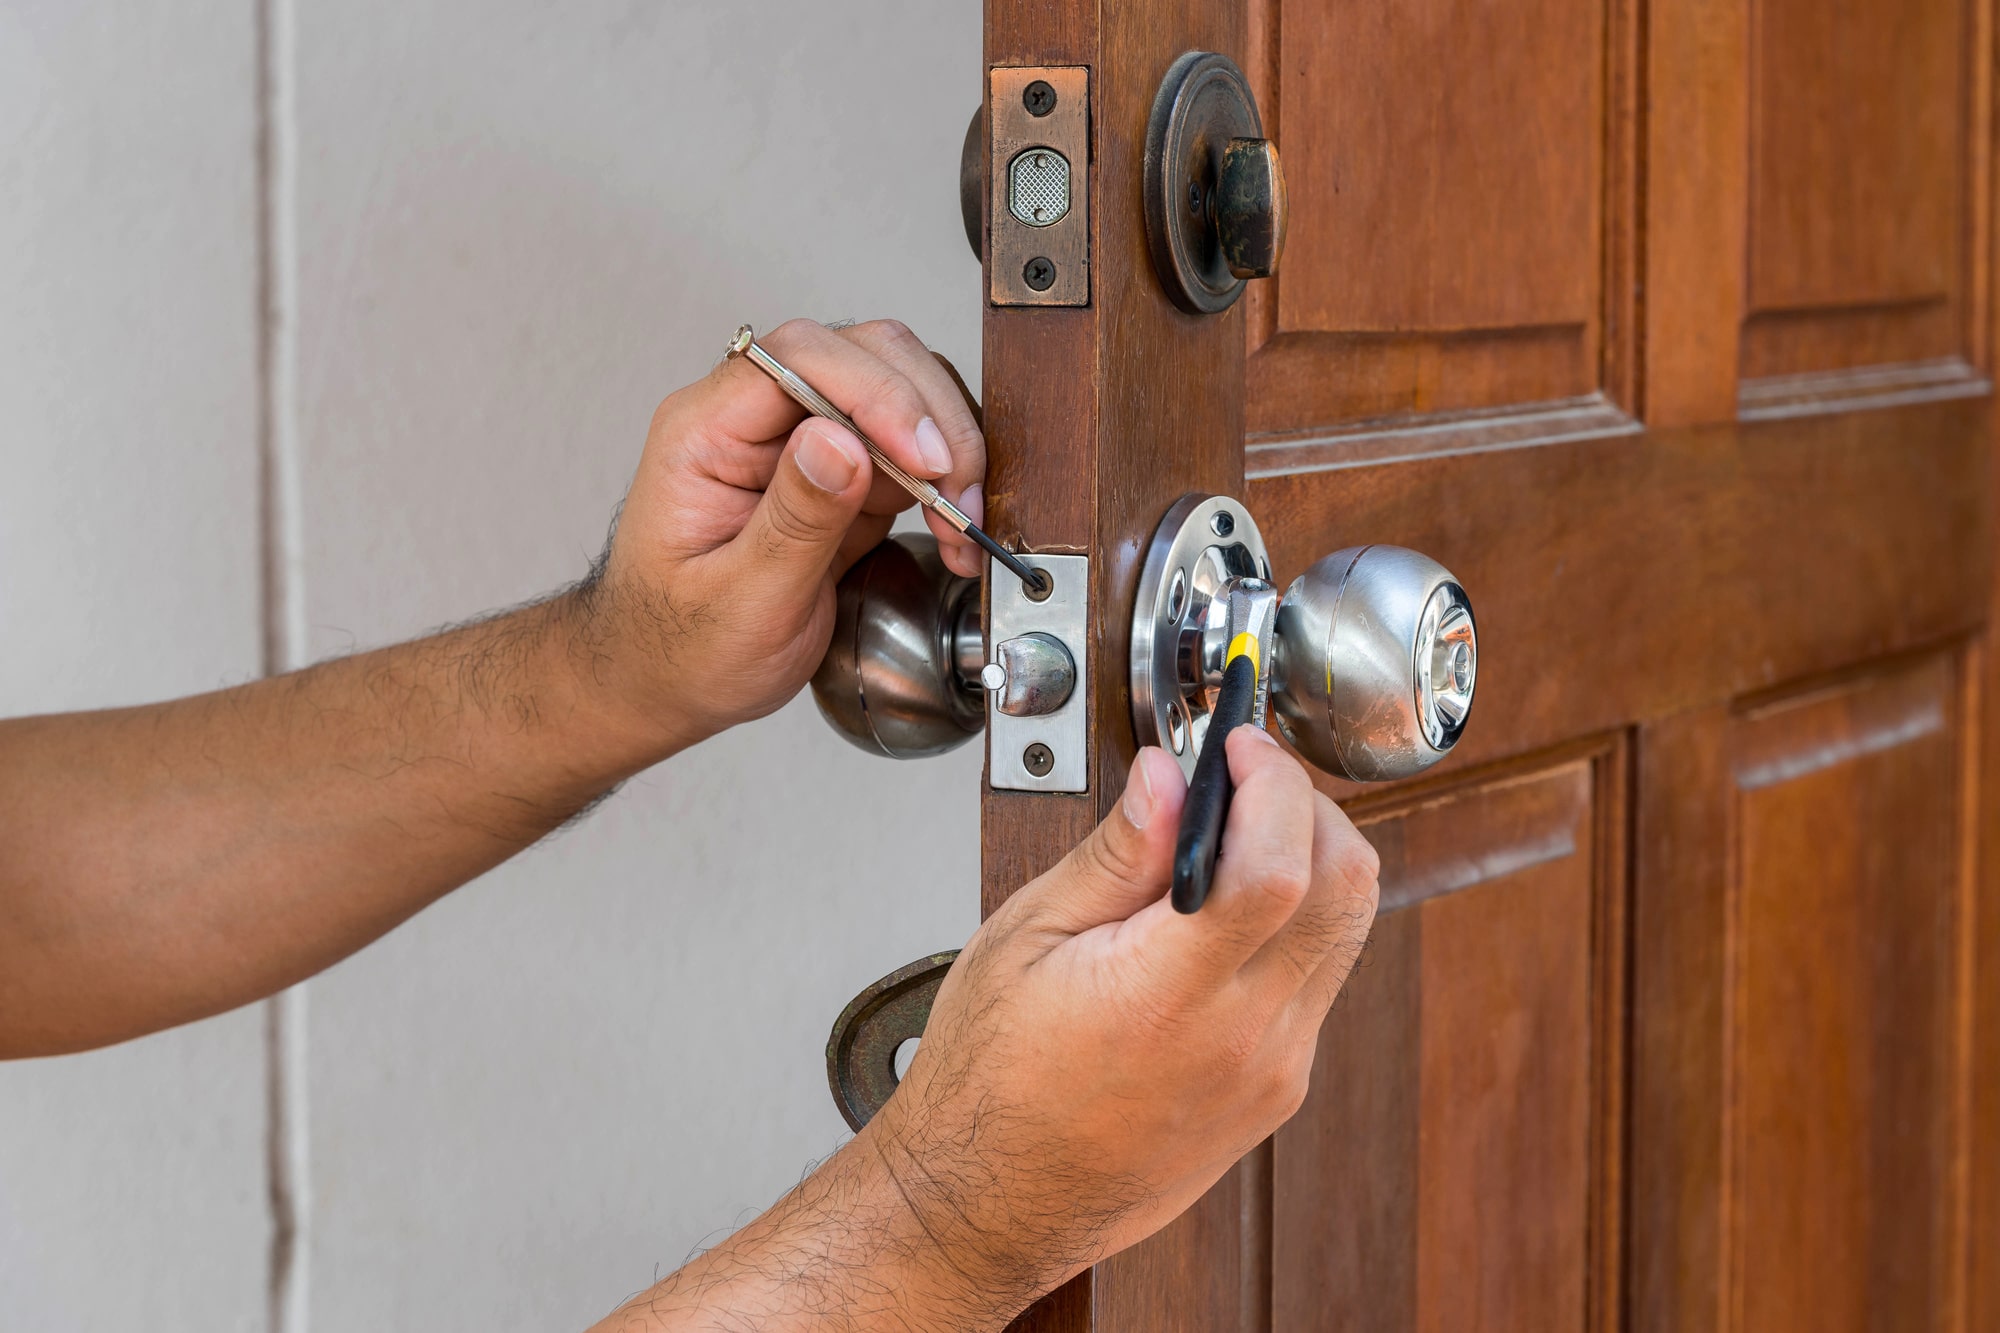 Should You Replace or Rekey Your Lock?